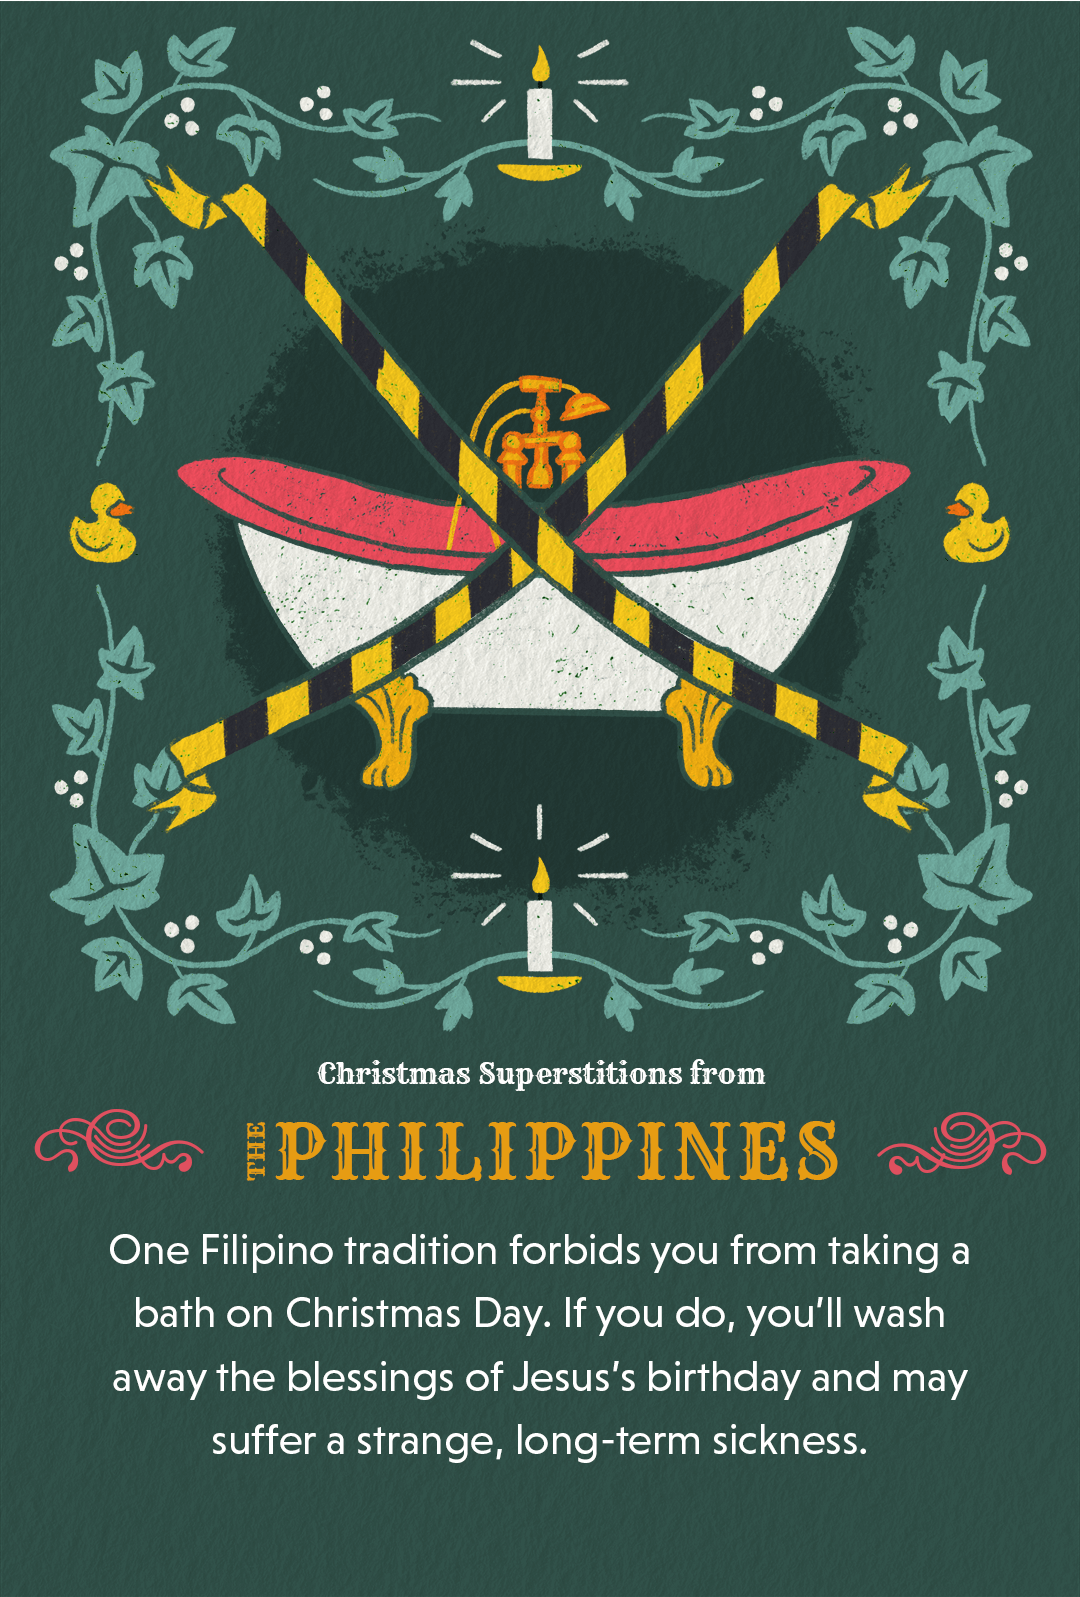 Unusual Christmas folklore from the Philippines